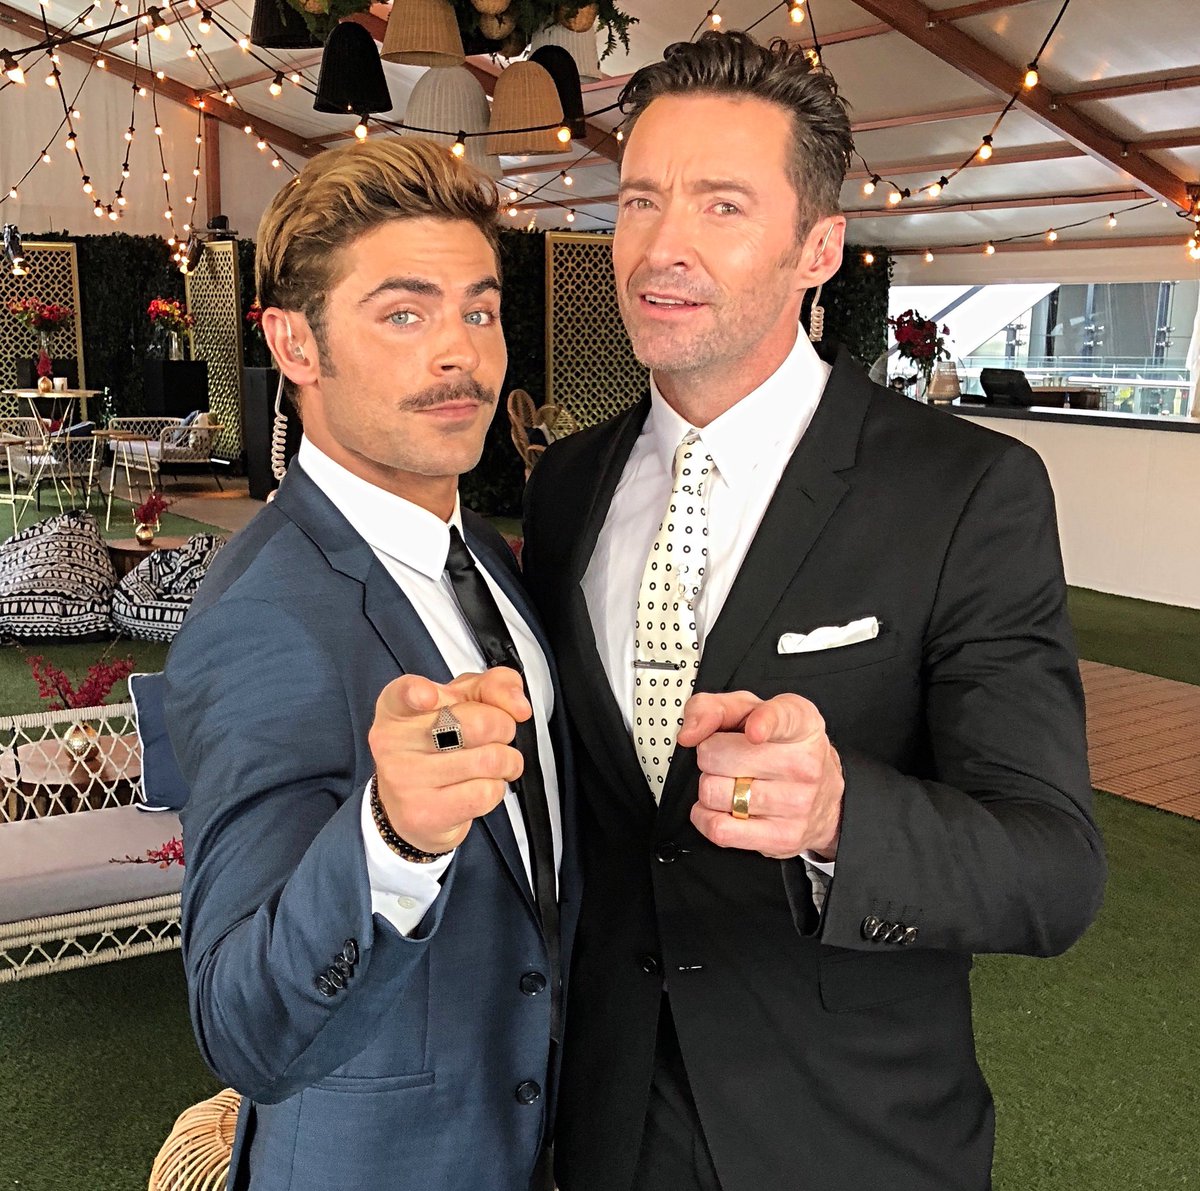 Whose hair is higher? #hair #height @ZacEfron https://t.co/8XLseigecP